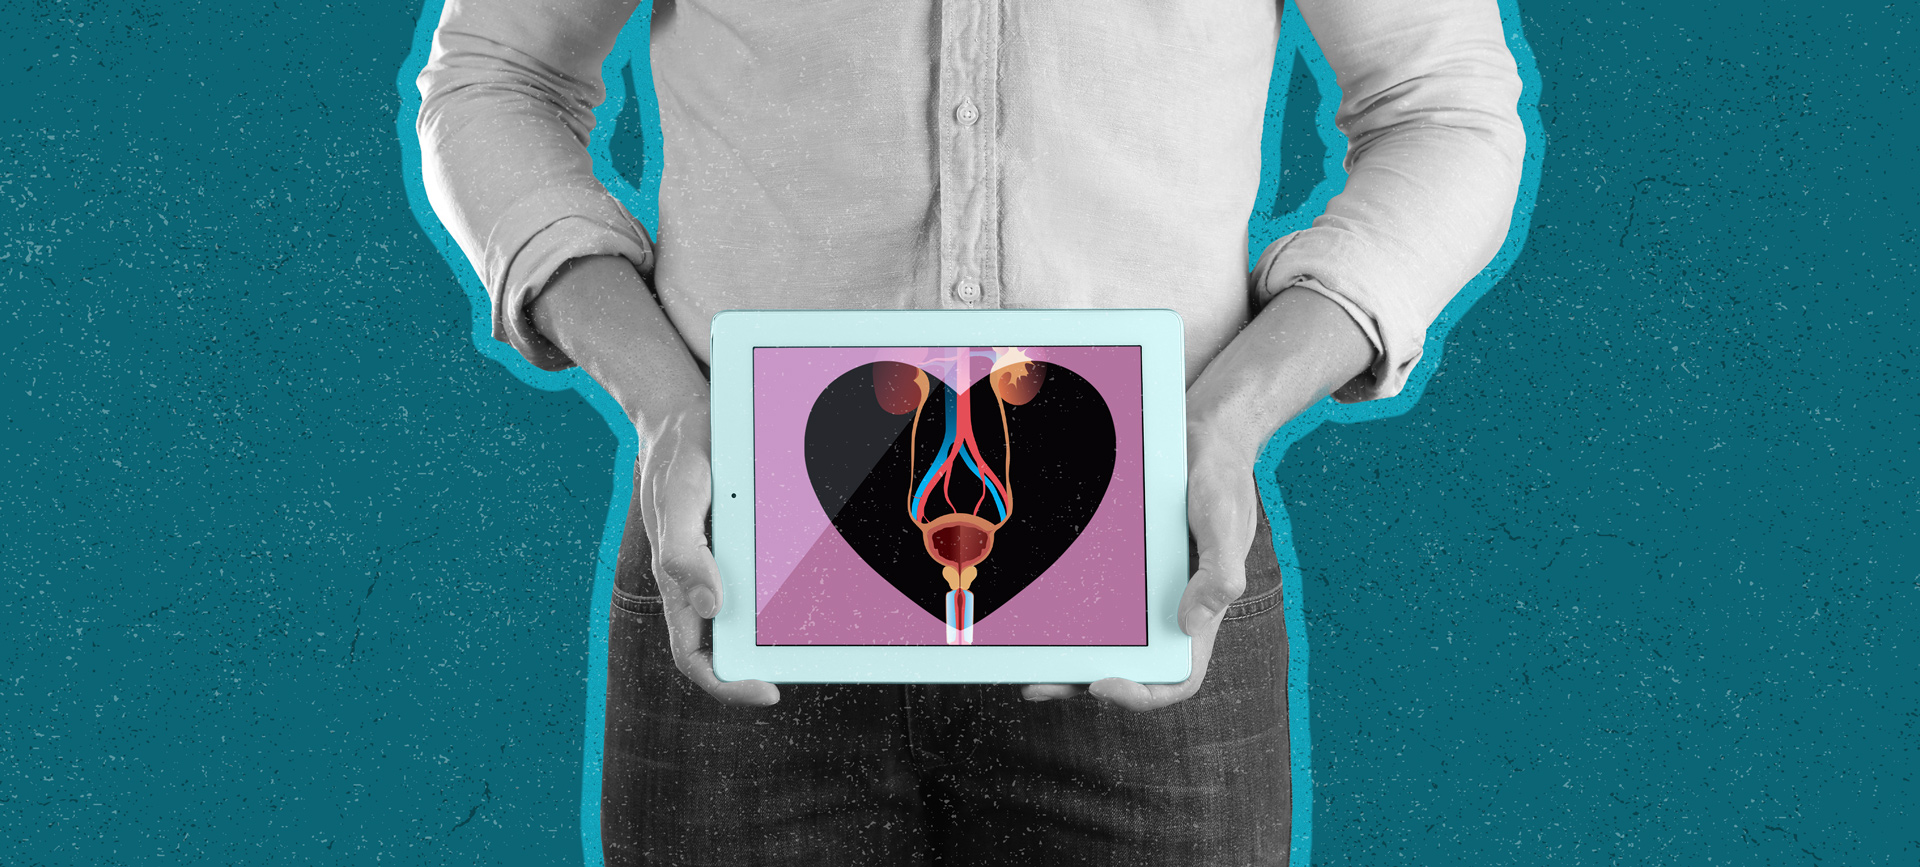 man holds tablet with prostate gland system in pink on teal border